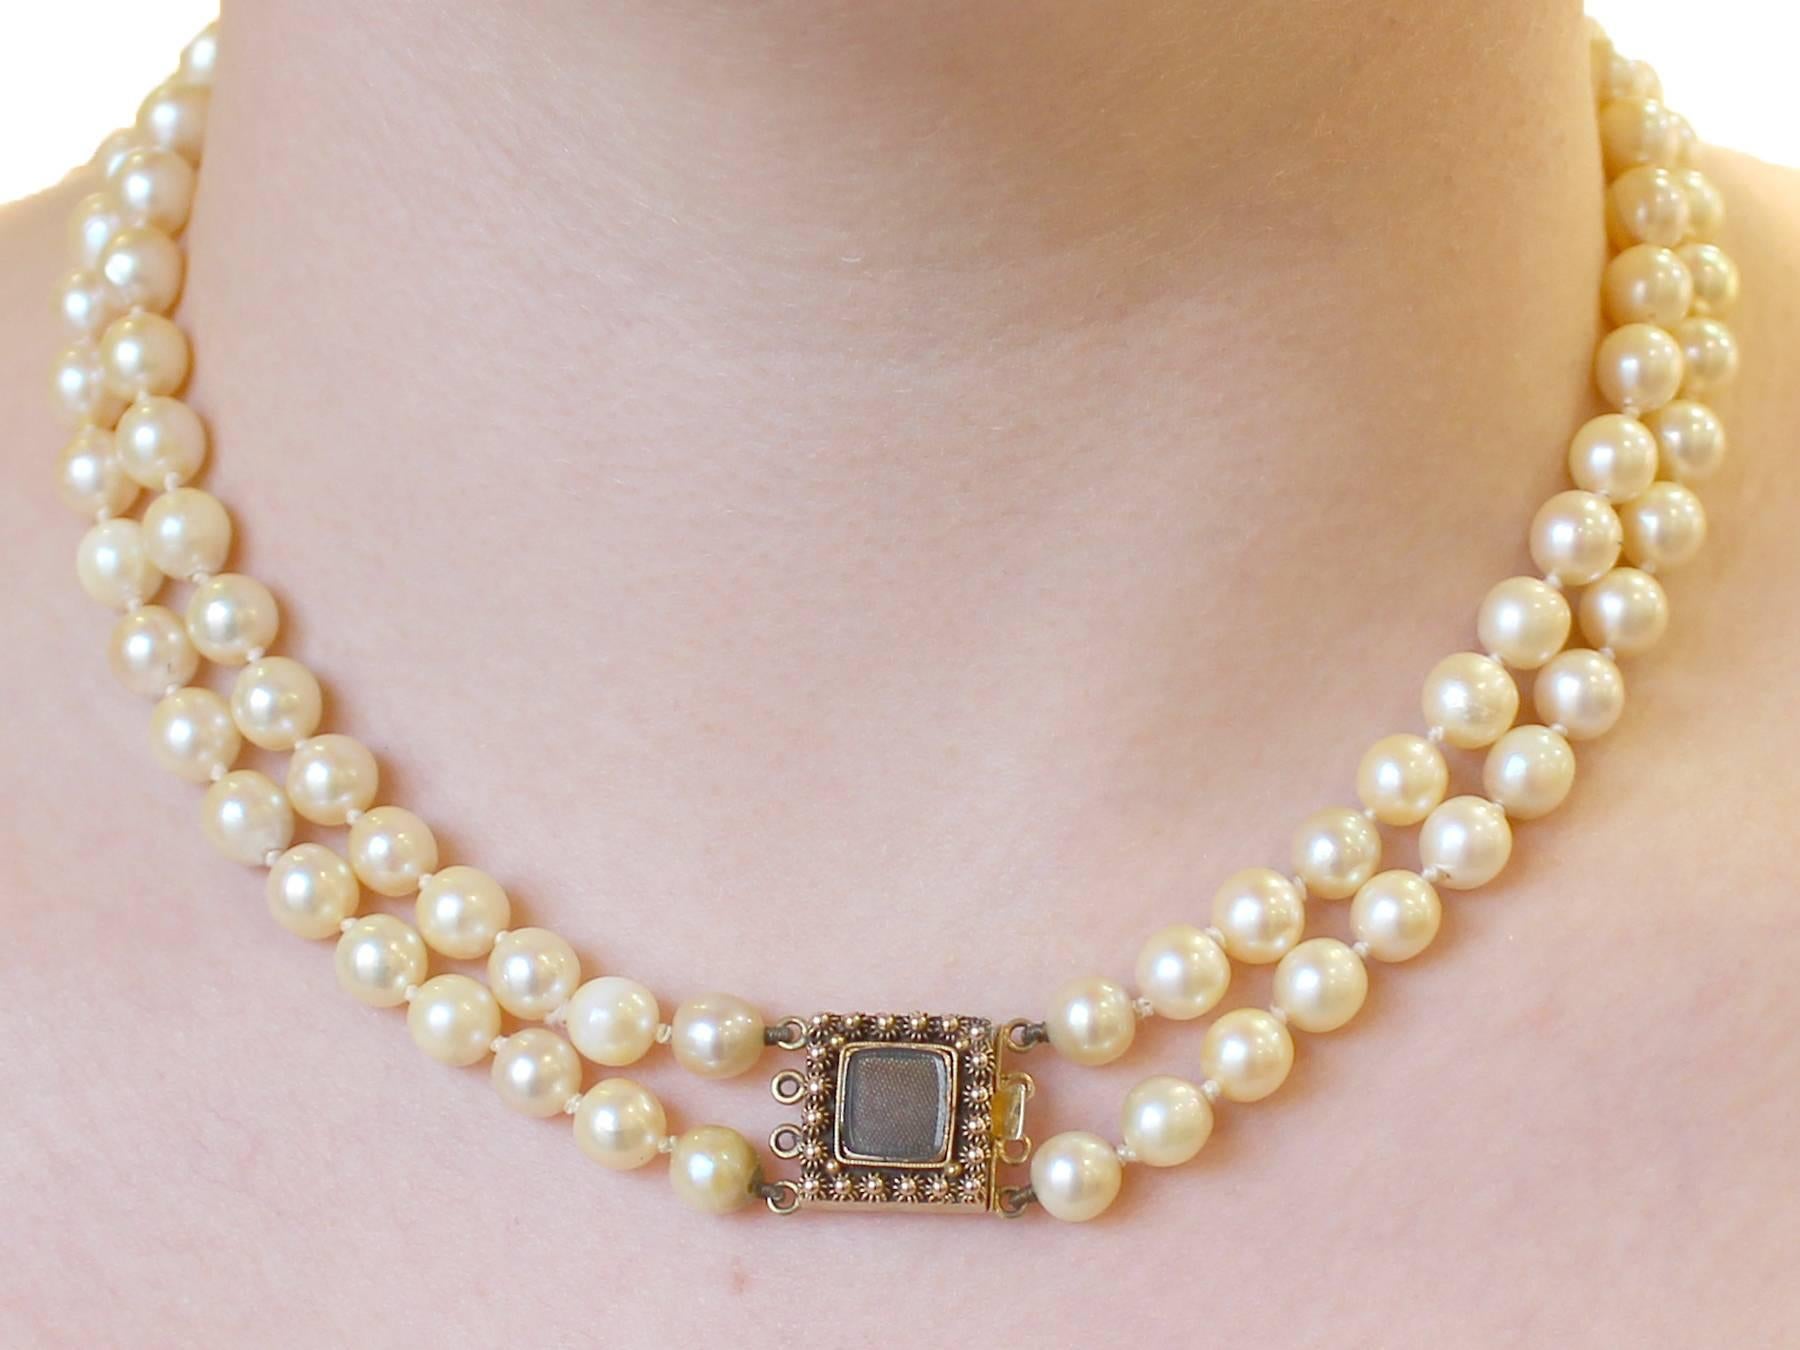 Double Strand Pearl Necklace with 18k Yellow Gold Locket Clasp - Vintage 2